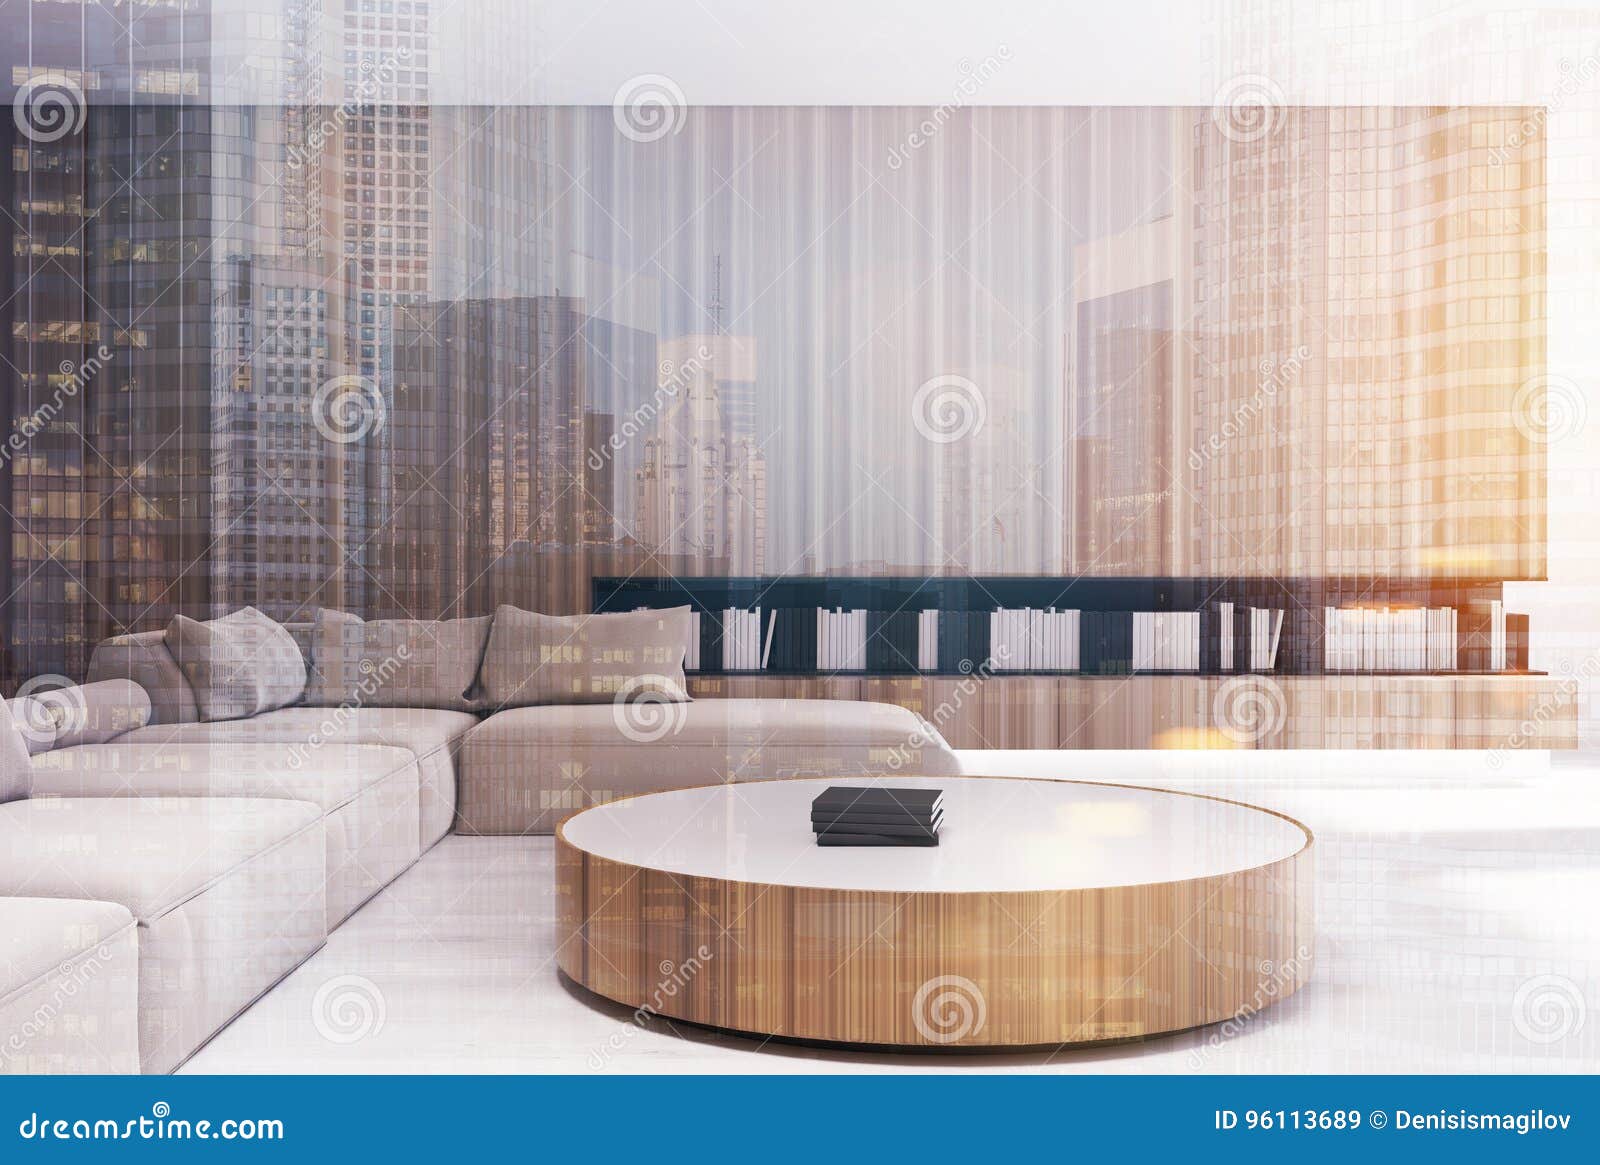 Wooden Living Room Interior Round Table Toned Stock Illustration